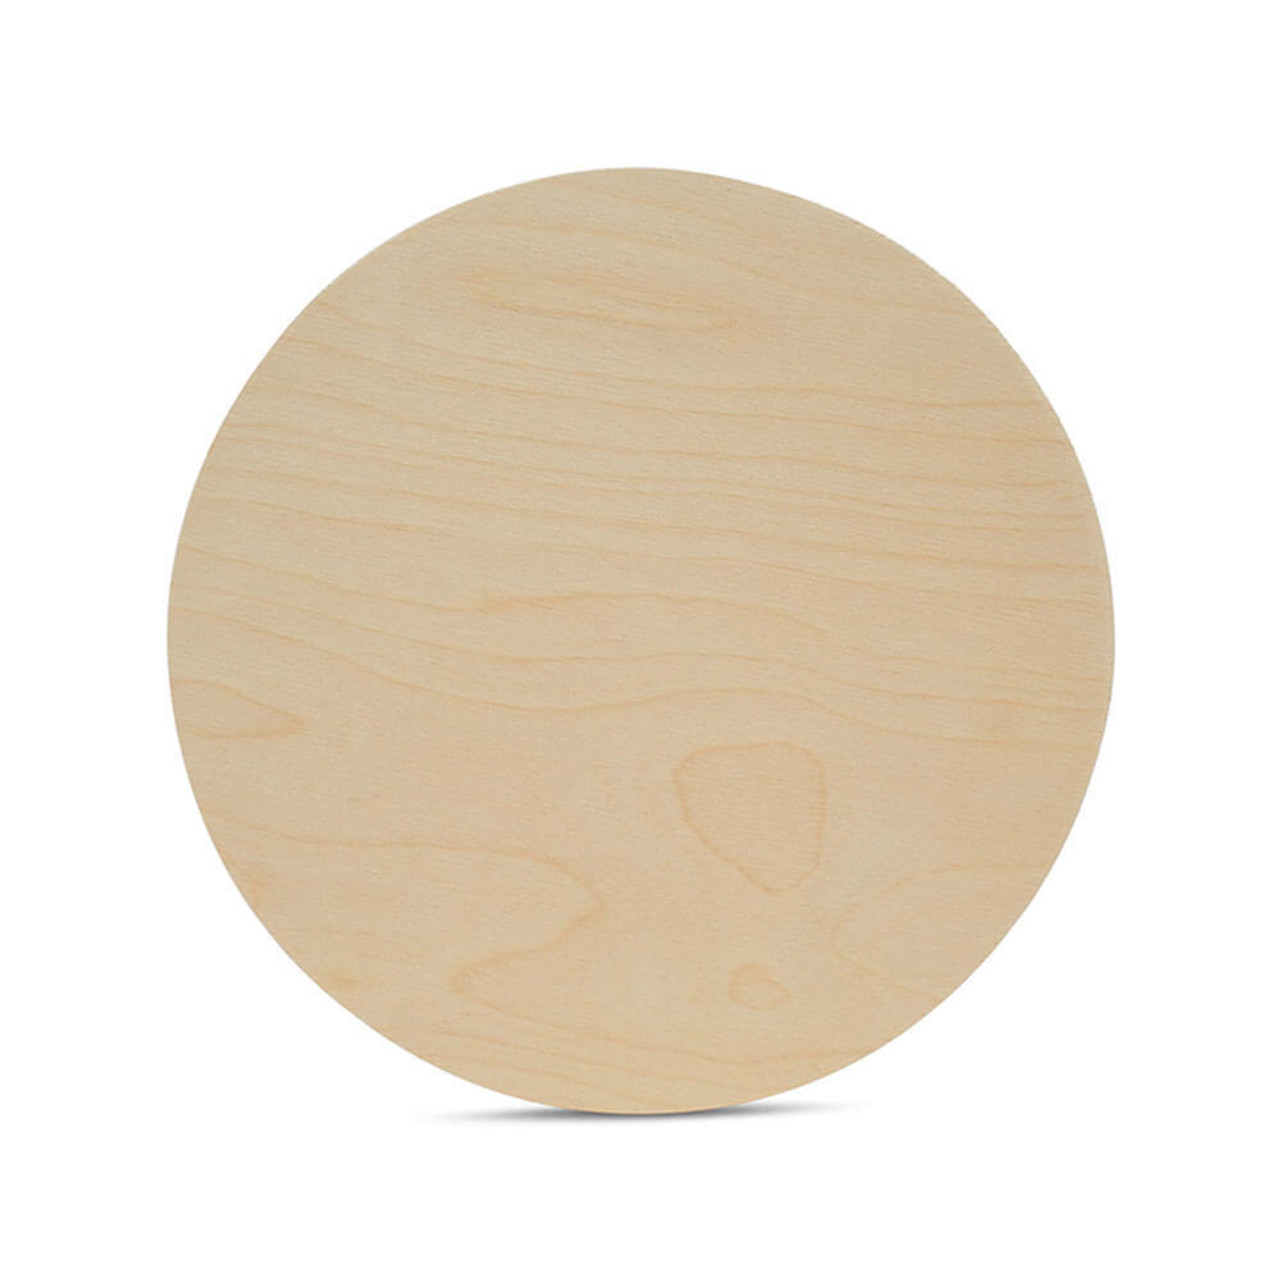 Unfinished Wood Circle Cutouts 12 Inches 